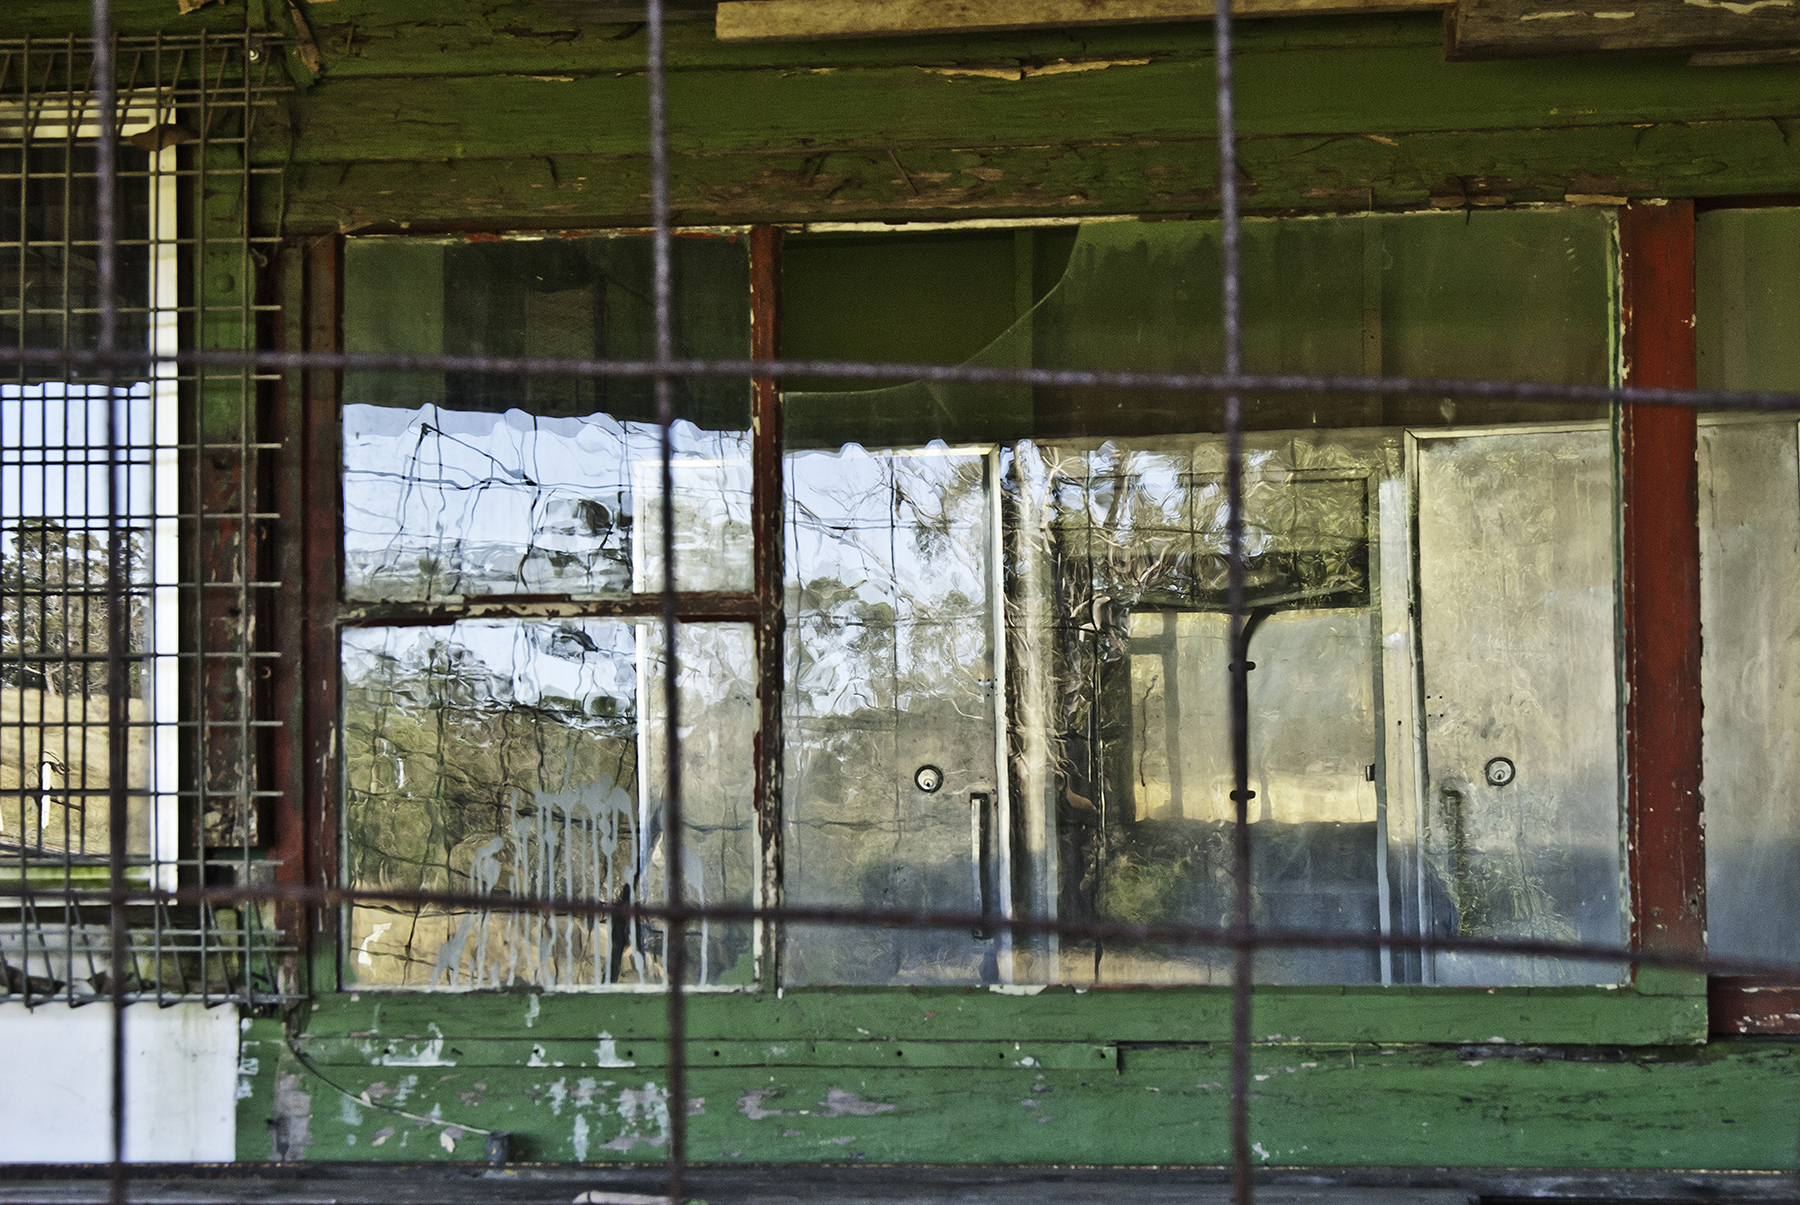    Restructure (New South Wales)    Archival photograph on aluminum, 24 x 36 inches 